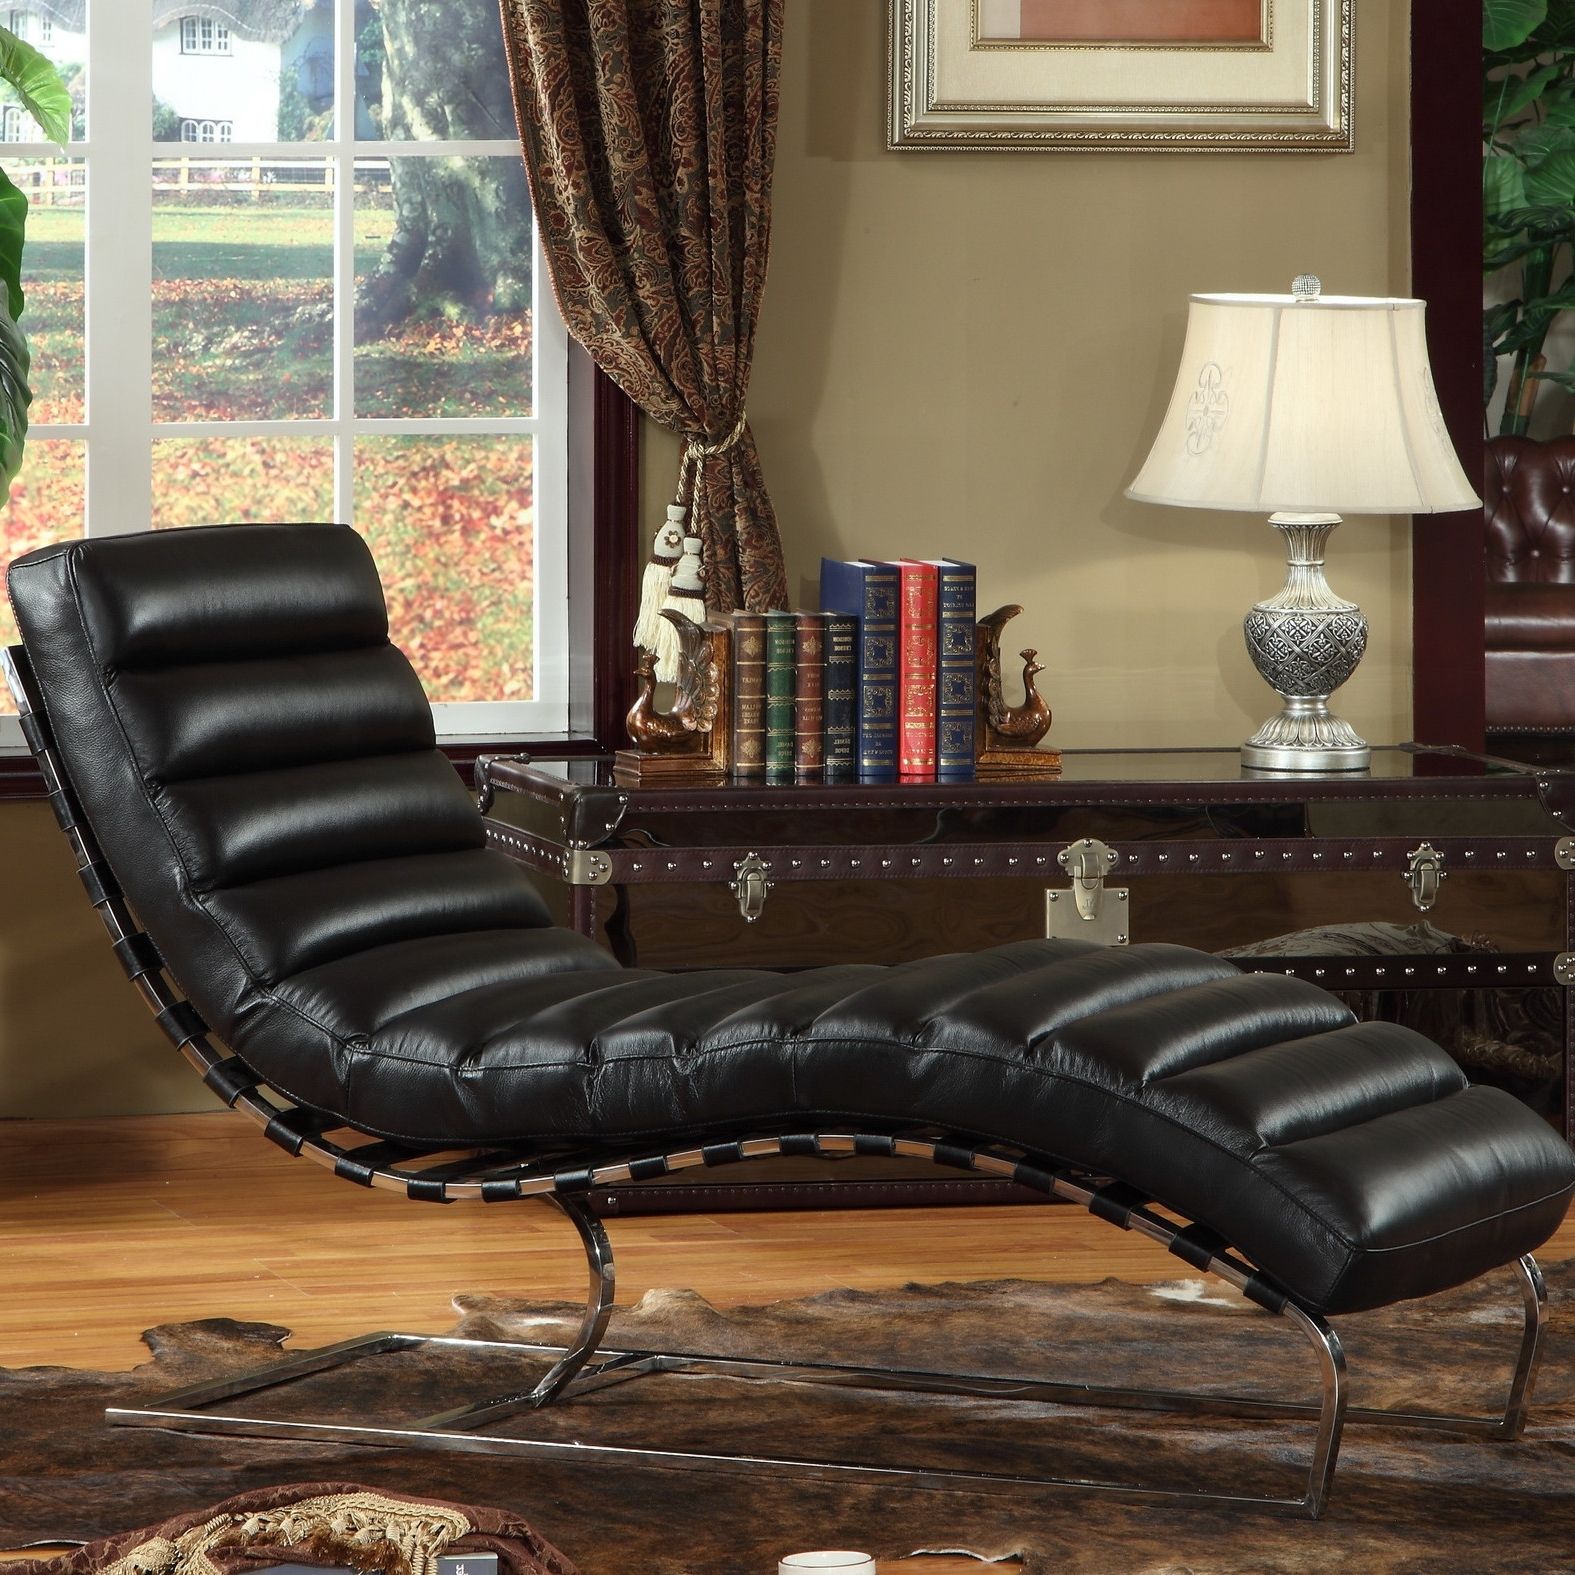 Leather Chaise Lounge Chairs In Well Known Beautiful Leather Chaise Lounge Chair — Lustwithalaugh Design (View 12 of 15)